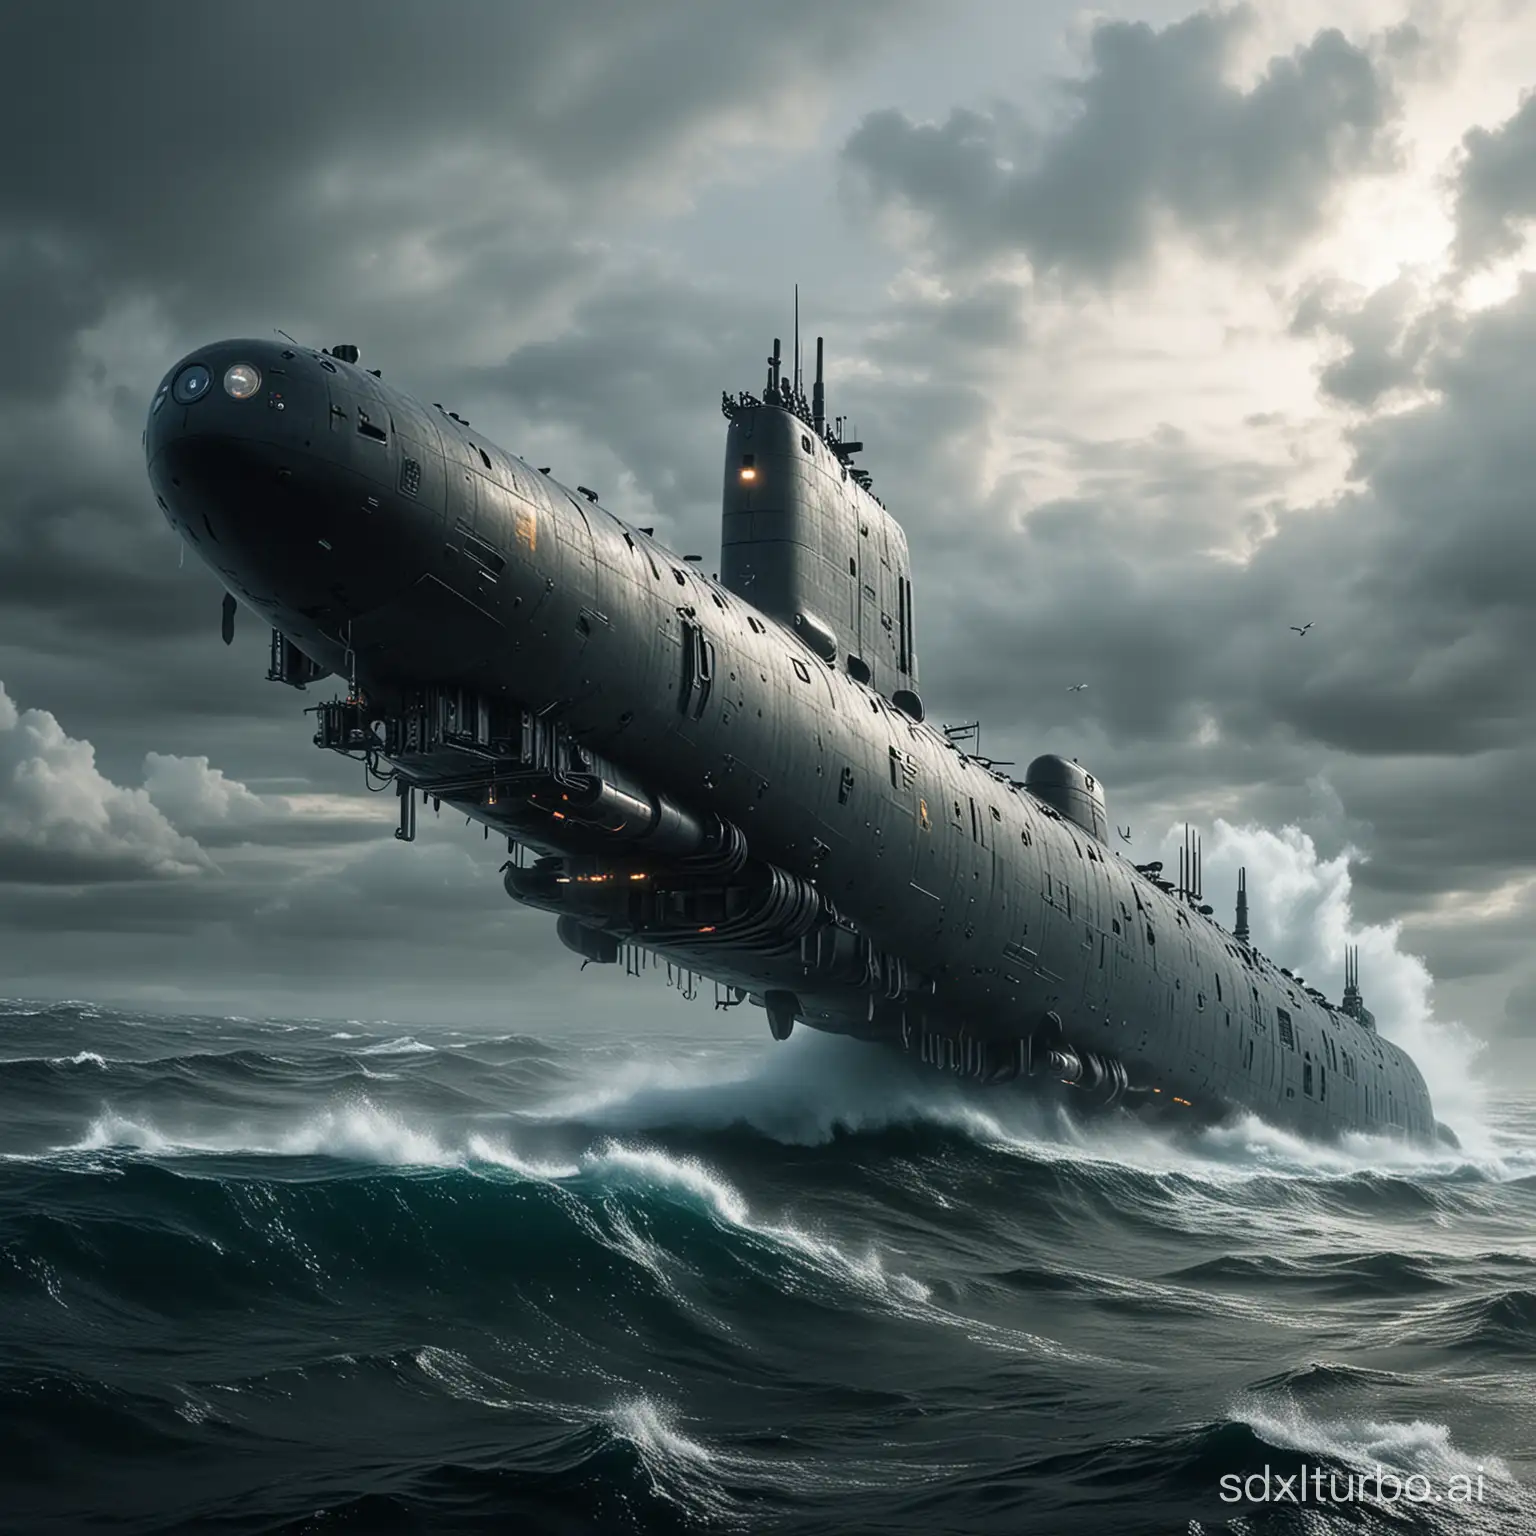 Futuristic-Nuclear-Submarine-Exploring-Uncharted-Depths